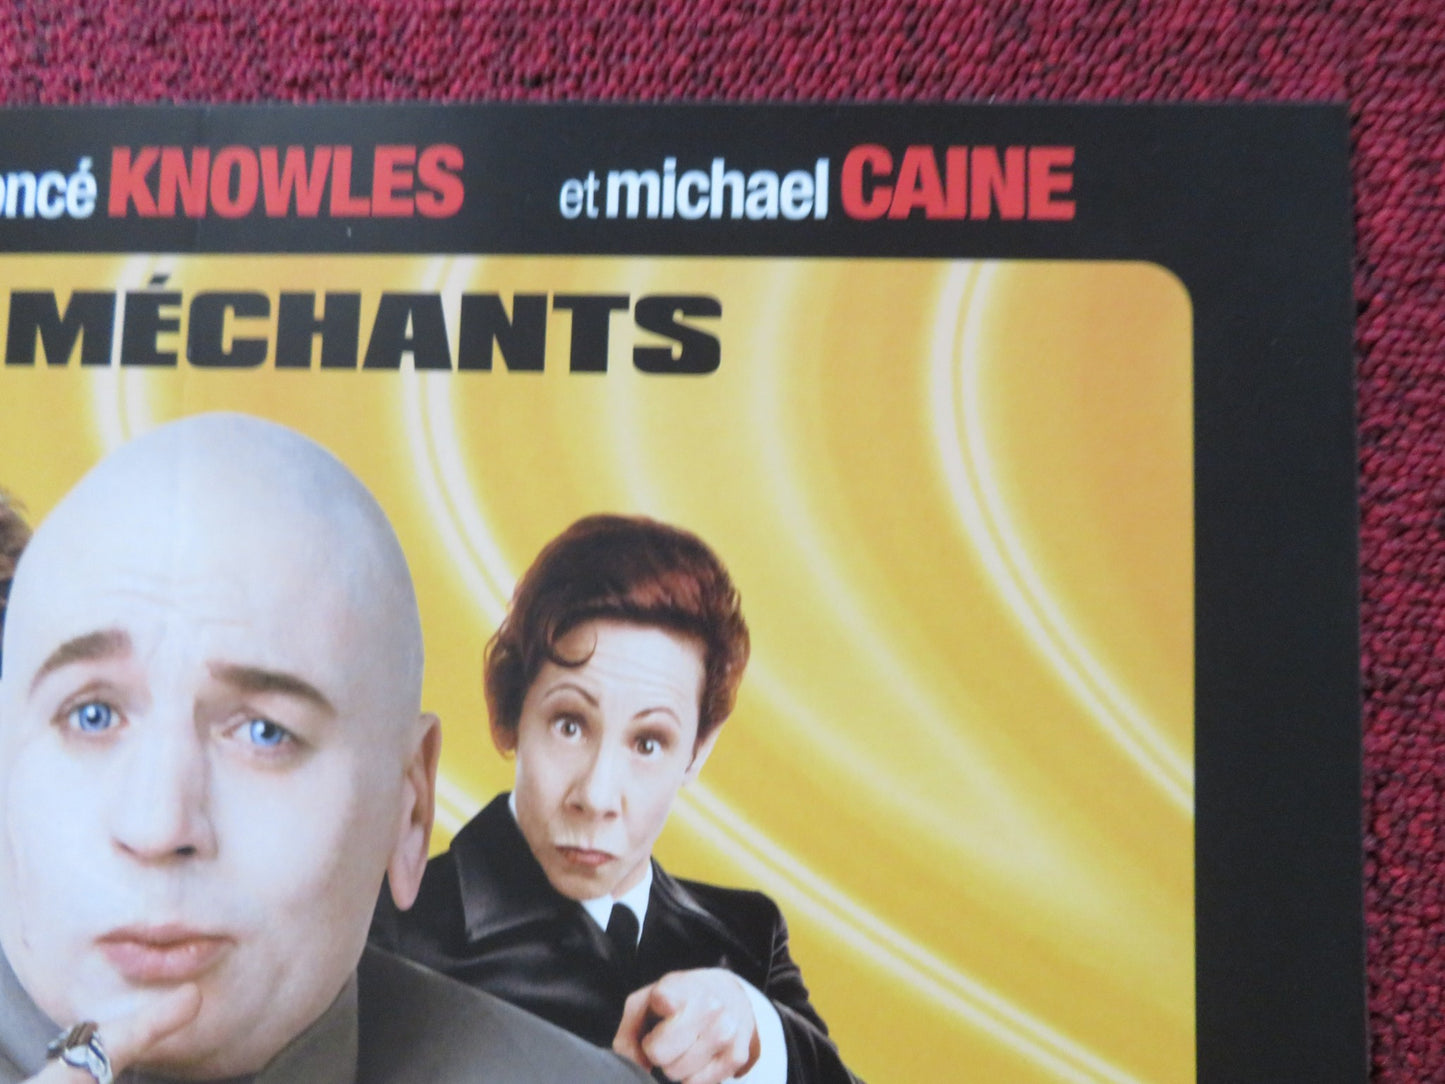 AUSTIN POWERS IN GOLDMEMBER- A FRENCH POSTER MIKE MYERS BEYONCE M.CAINE 2002